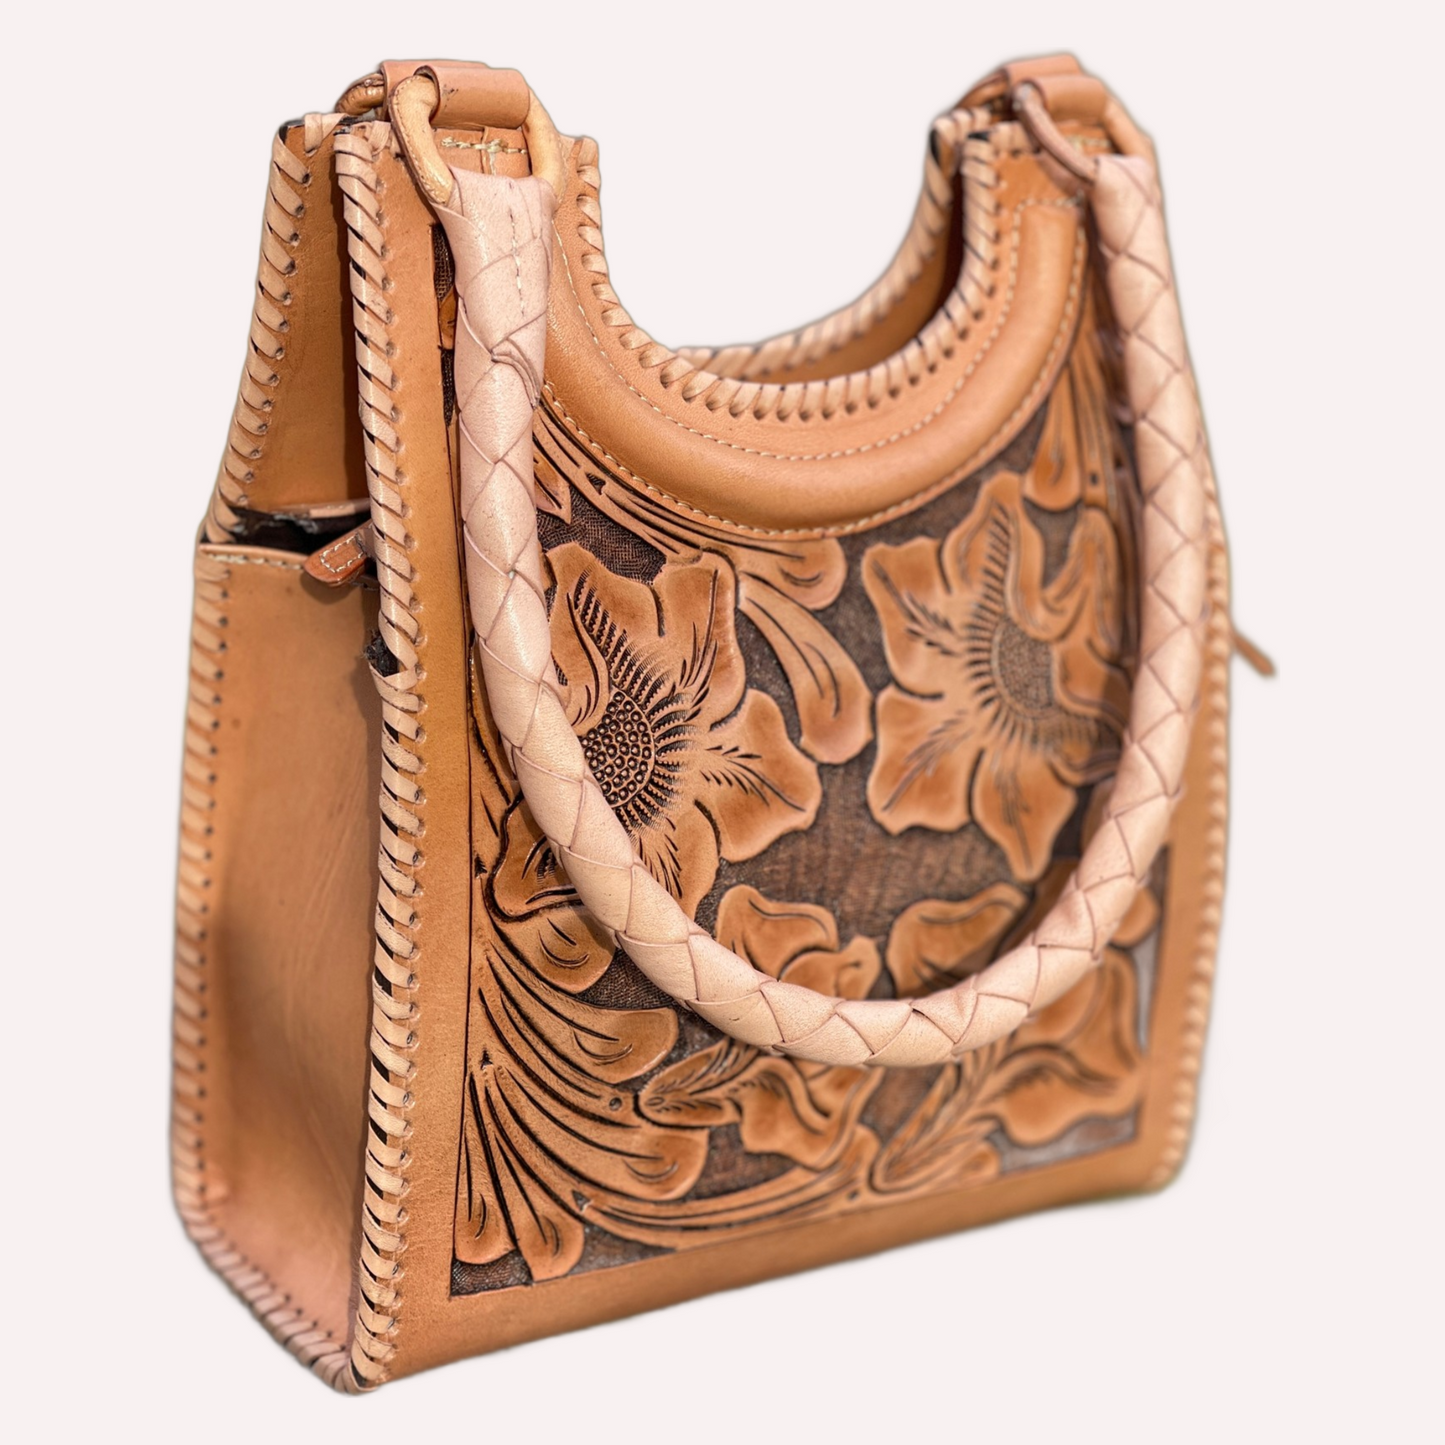 Hand Tooled Leather Hobo Bag "BAALY" by ALLE - ALLE Handbags